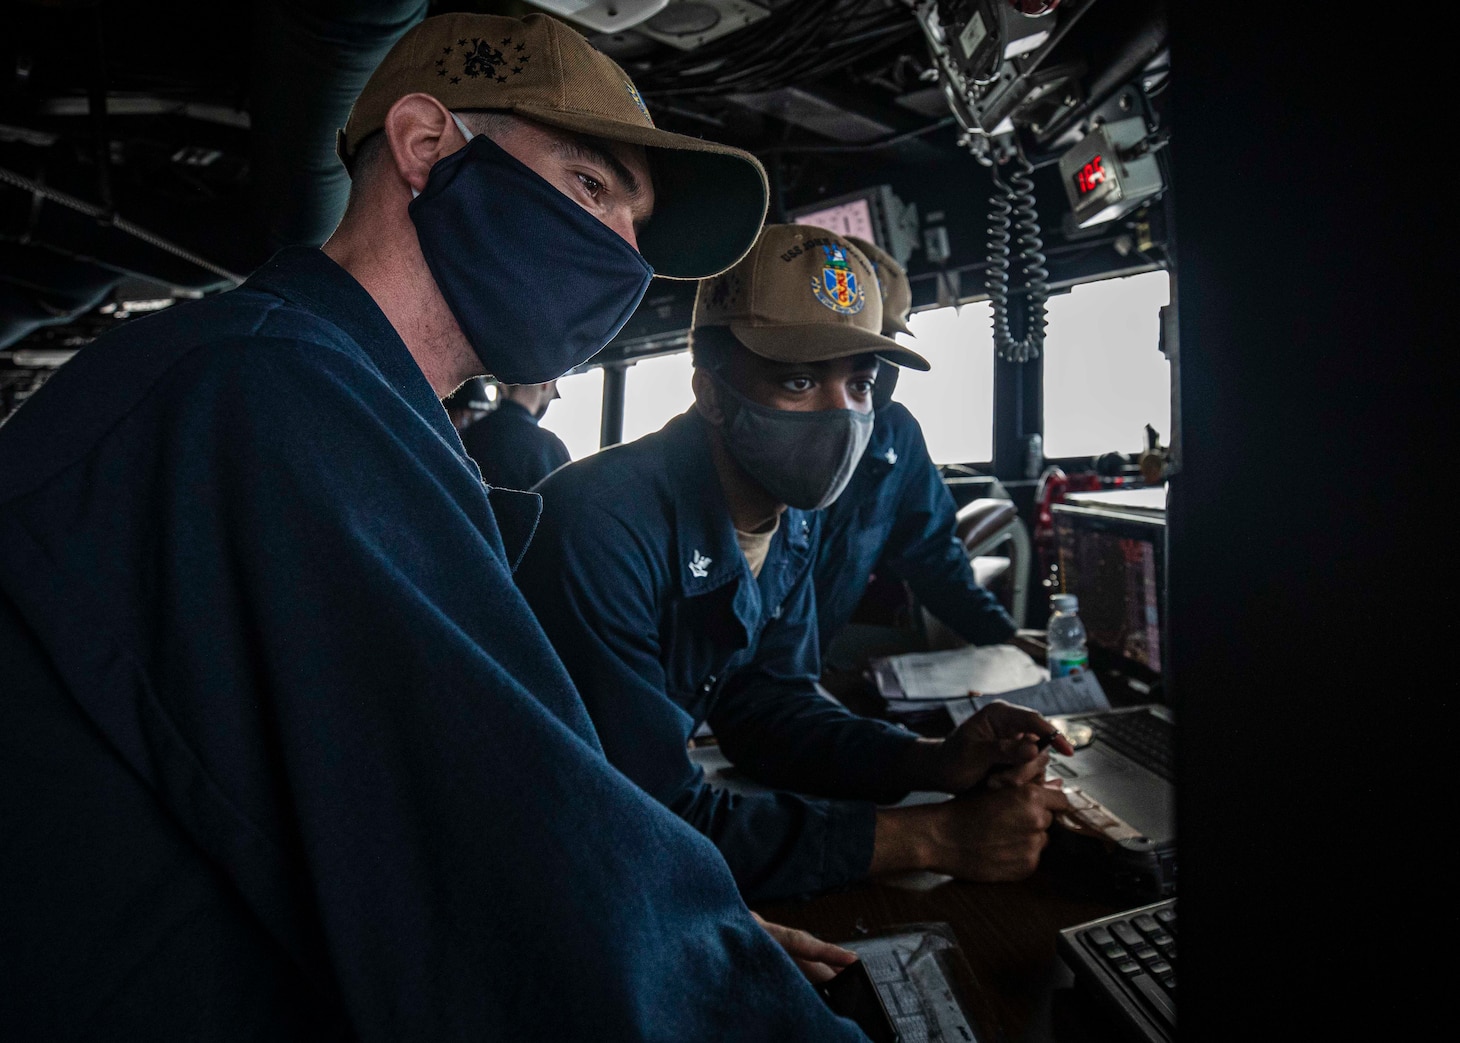 SOUTH CHINA SEA (Dec. 22, 2020) Navigator Lt. j.g. Daniel Feeney, left, from Old Greenwich, Connecticut, and Quartermaster 2nd Class Asah Favors, from Suffolk, Virginia, review the ship’s course on the voyage management system (VMS) while standing watch in the pilot house as the guided-missile destroyer USS John S. McCain (DDG 56) conducts routine underway operations. McCain is forward-deployed to the U.S. 7th Fleet area of operations in support of security and stability in the Indo-Pacific region. (U.S. Navy photo by Mass Communication Specialist 2nd Class Markus Castaneda)